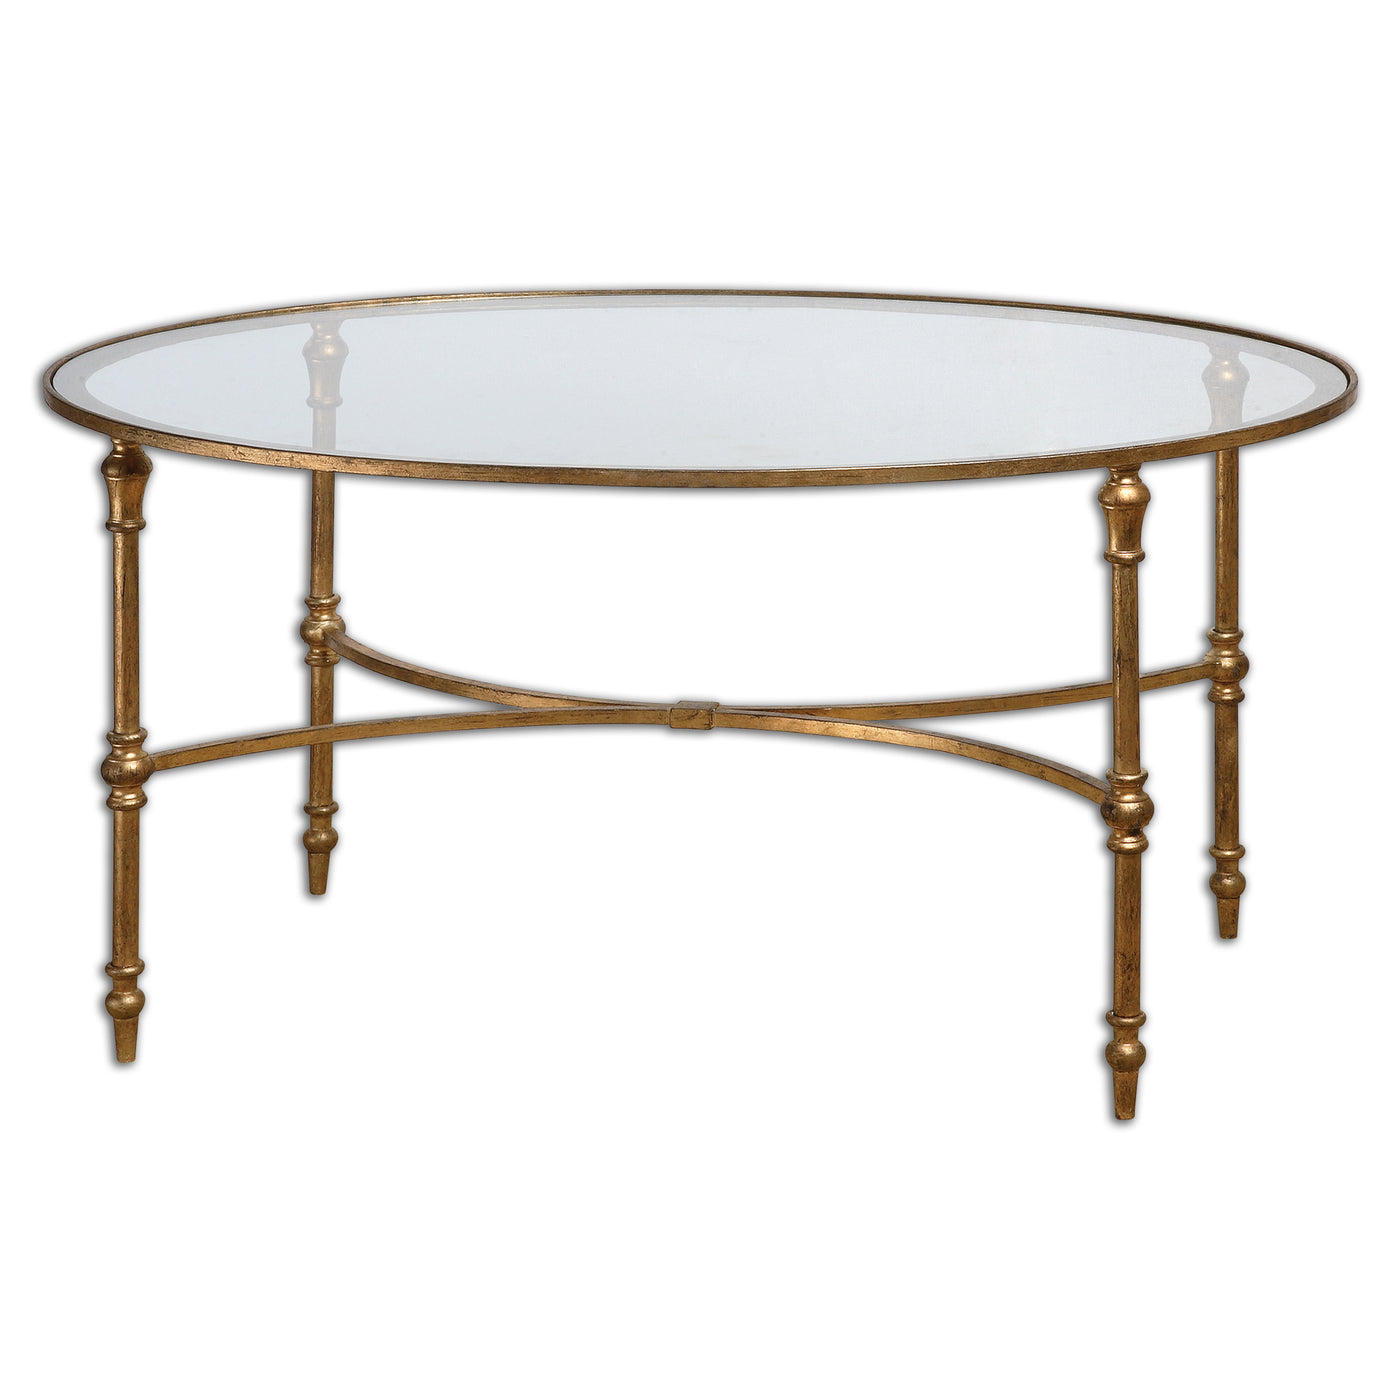 A Graceful, Oval Design Finished In Antiqued Gold Leaf Under Sturdy, Clear Tempered Glass.